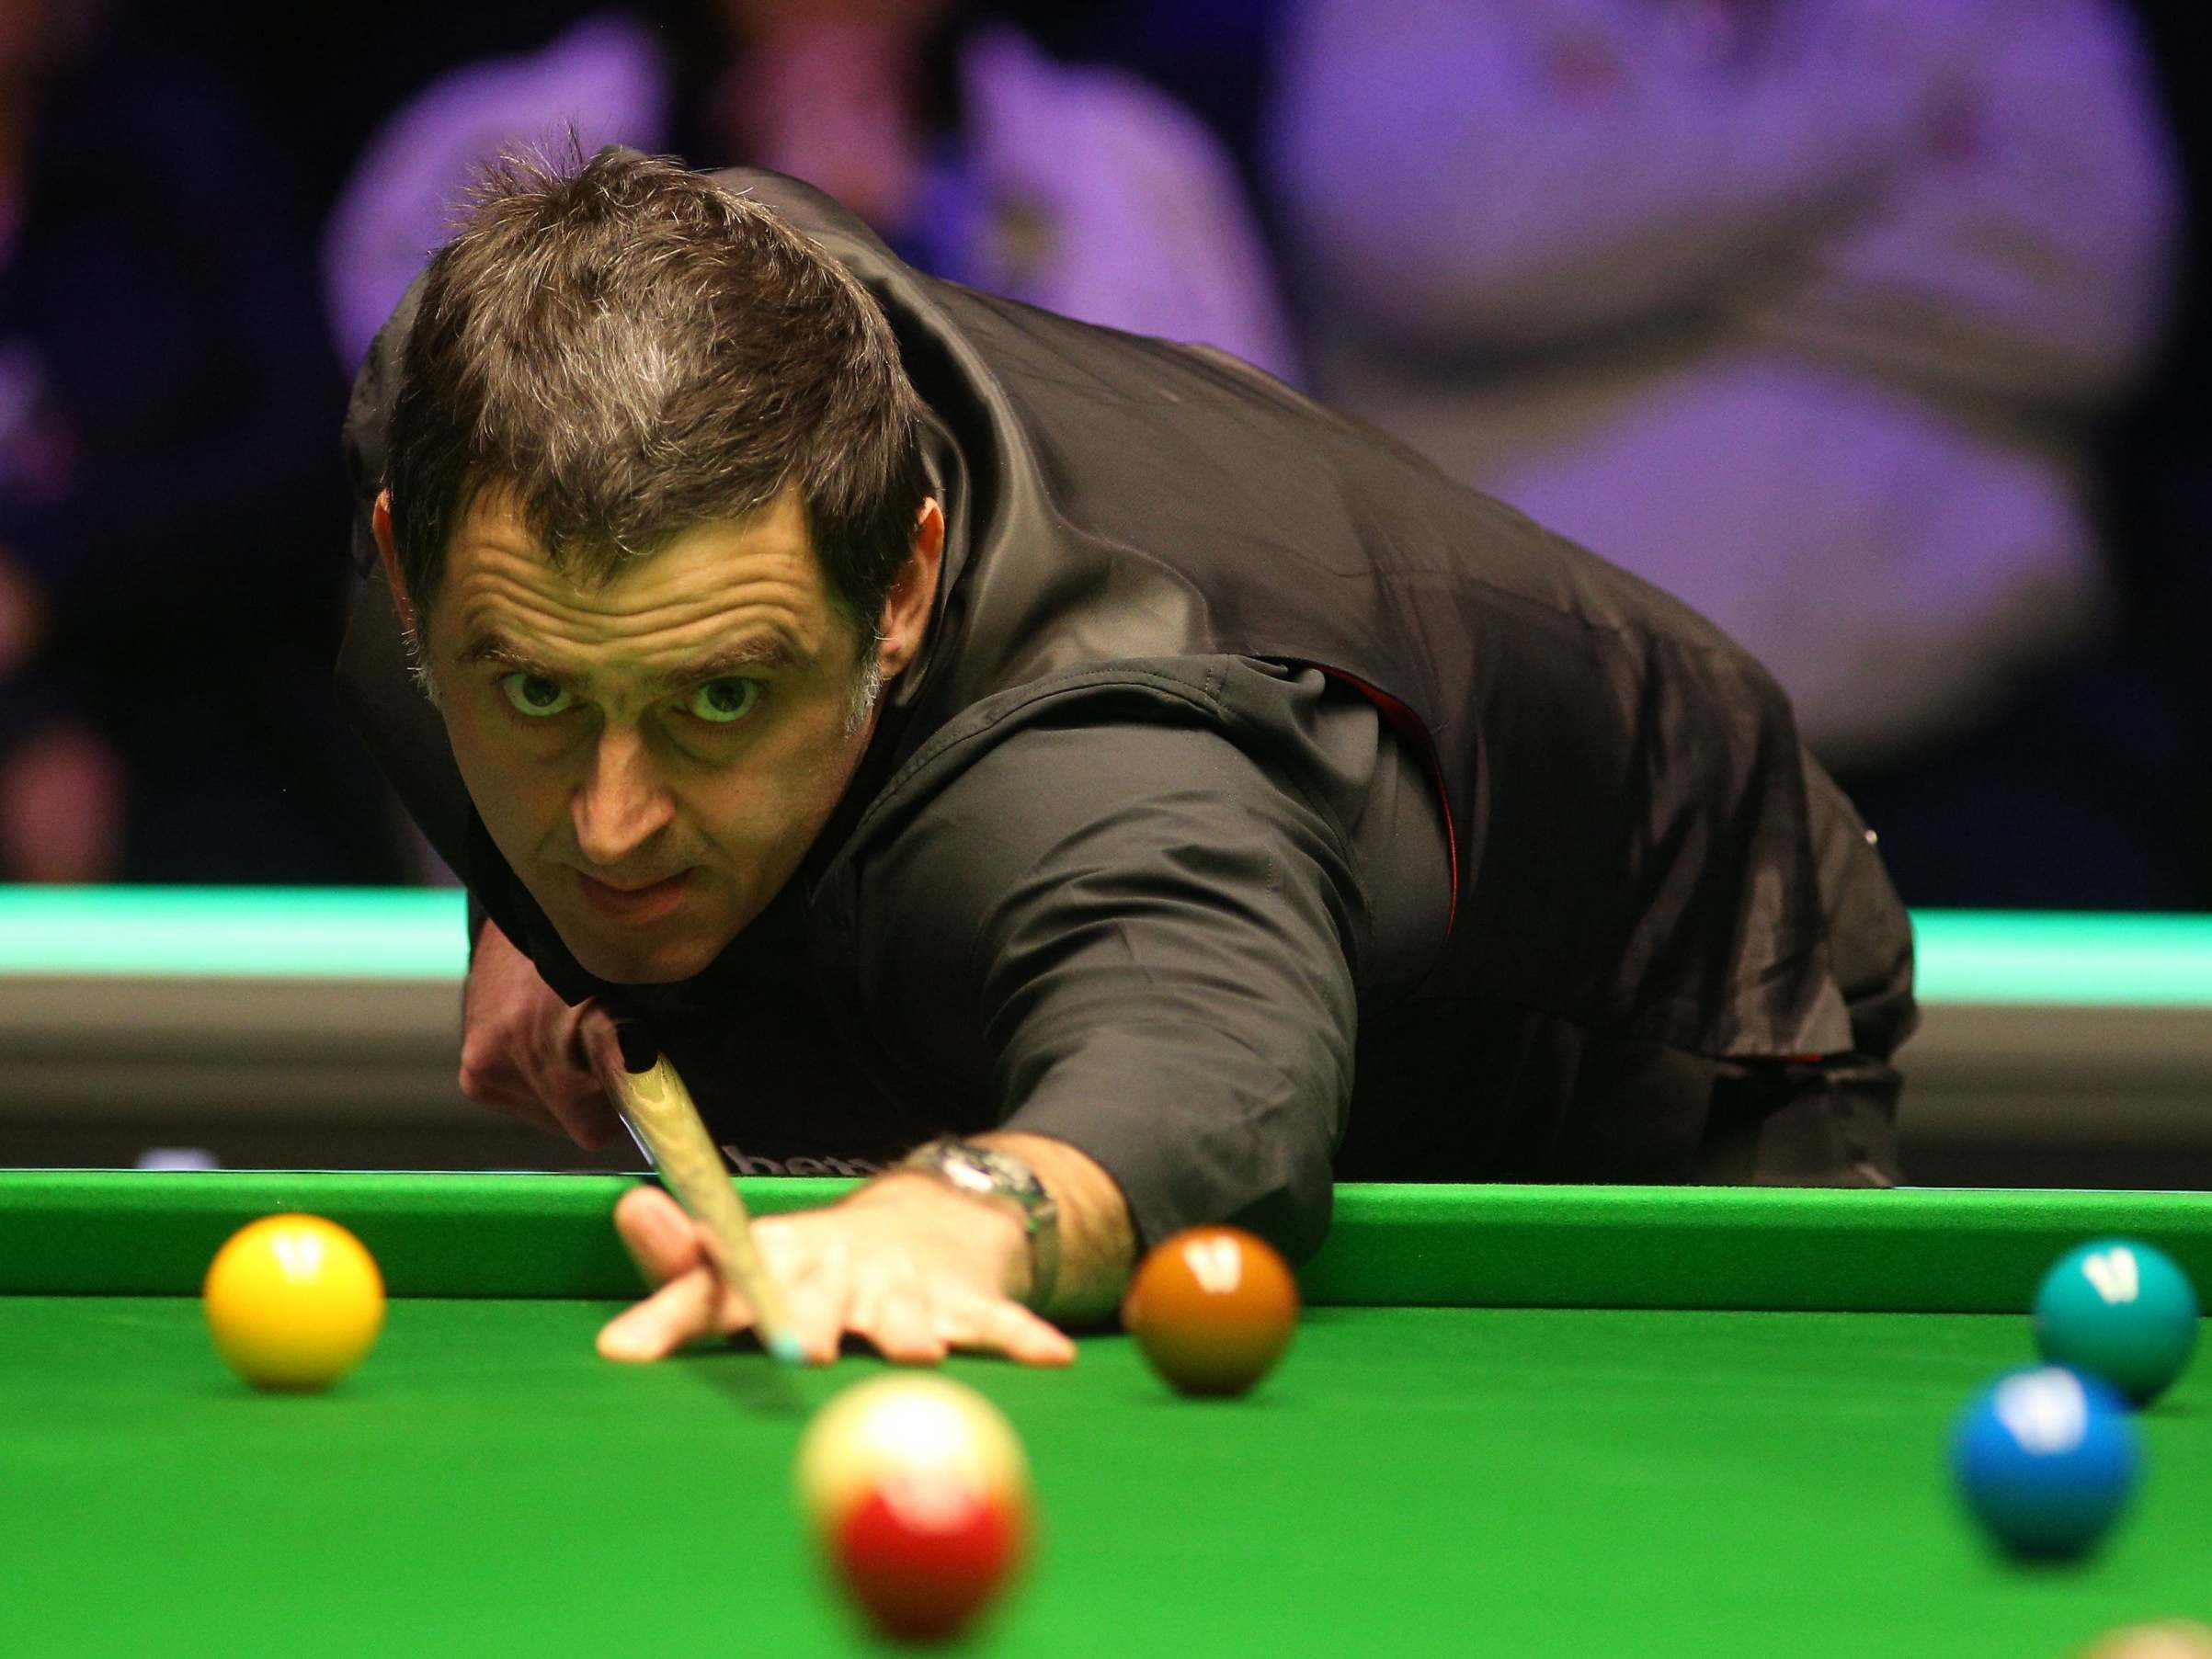 Ronnie O'Sullivan let his stranglehold slip in the evening session